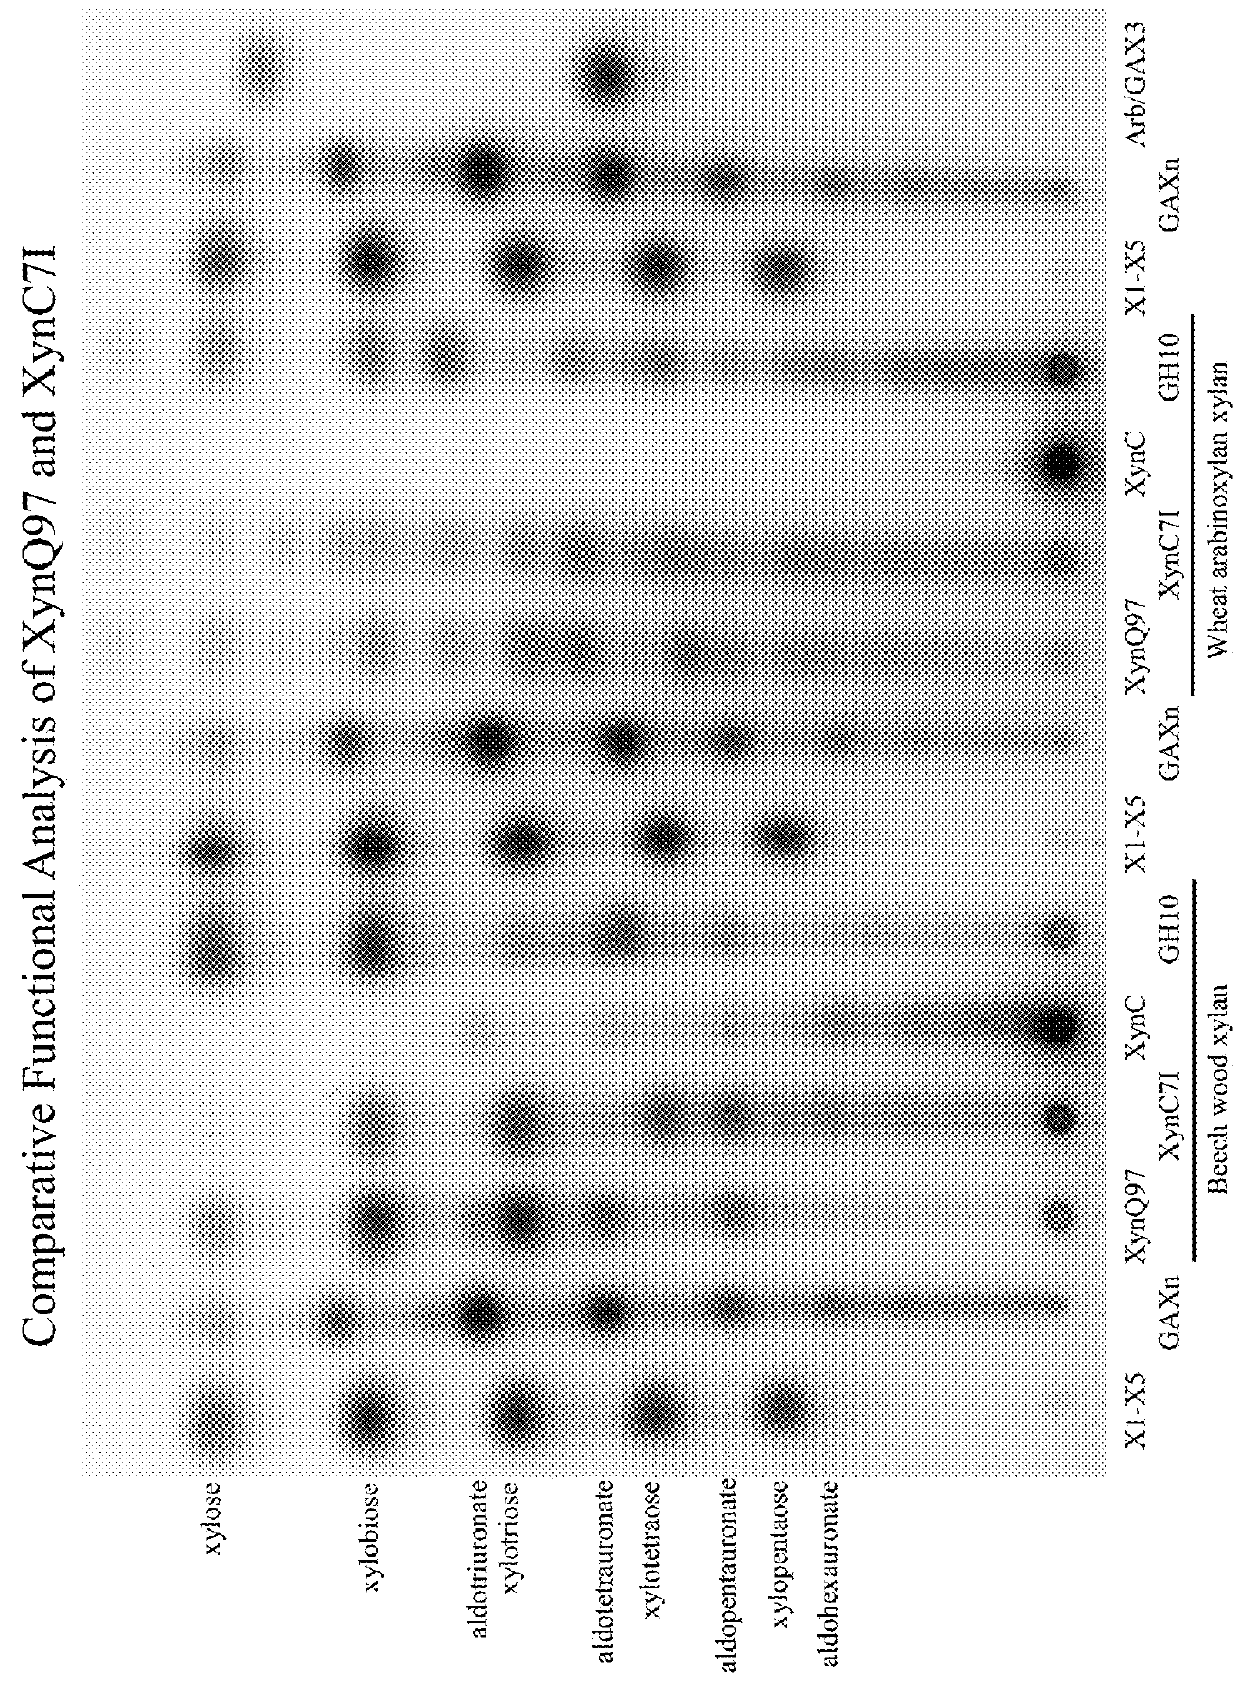 Glycosyl hydrolase xylanases, compositions and methods of use for efficient hydrolysis and processing of xylan